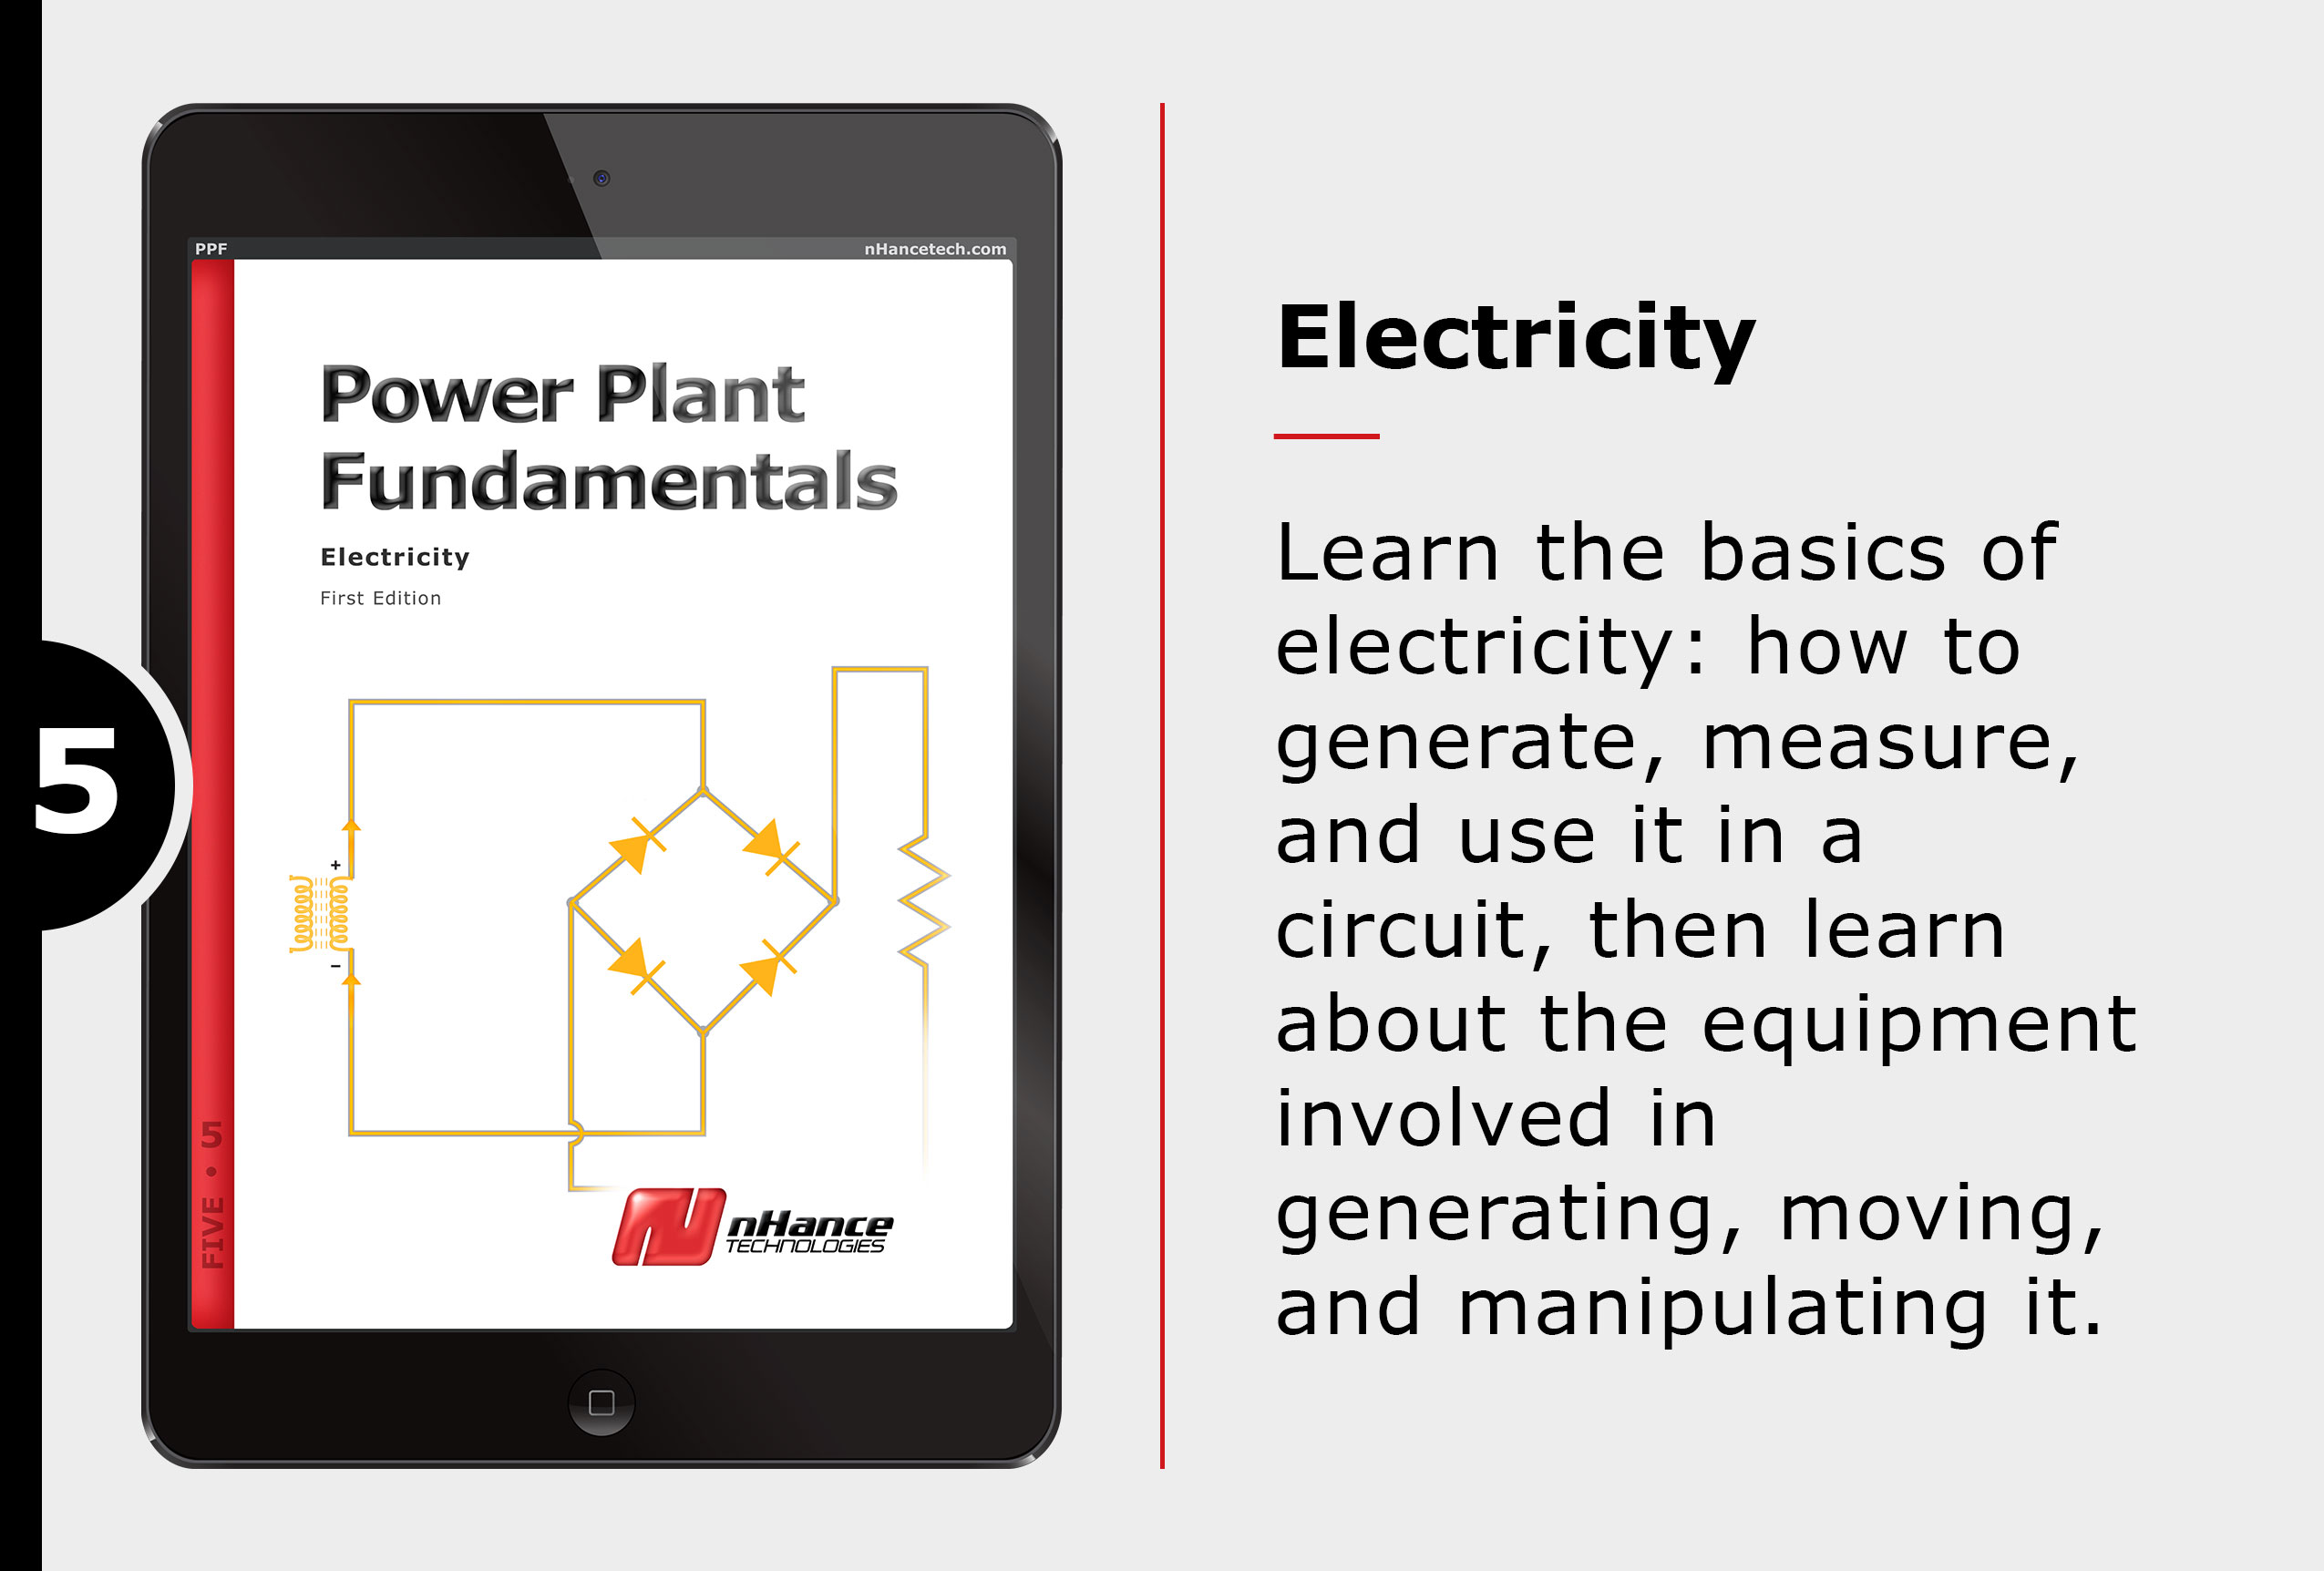 Electricity — Learn the basics of electricity: how to generate, measure, and use it in a circuit, then learn about the equipment involved in generating, moving, and manipulating it in this ebook from the Power Plant Fundamentals series.